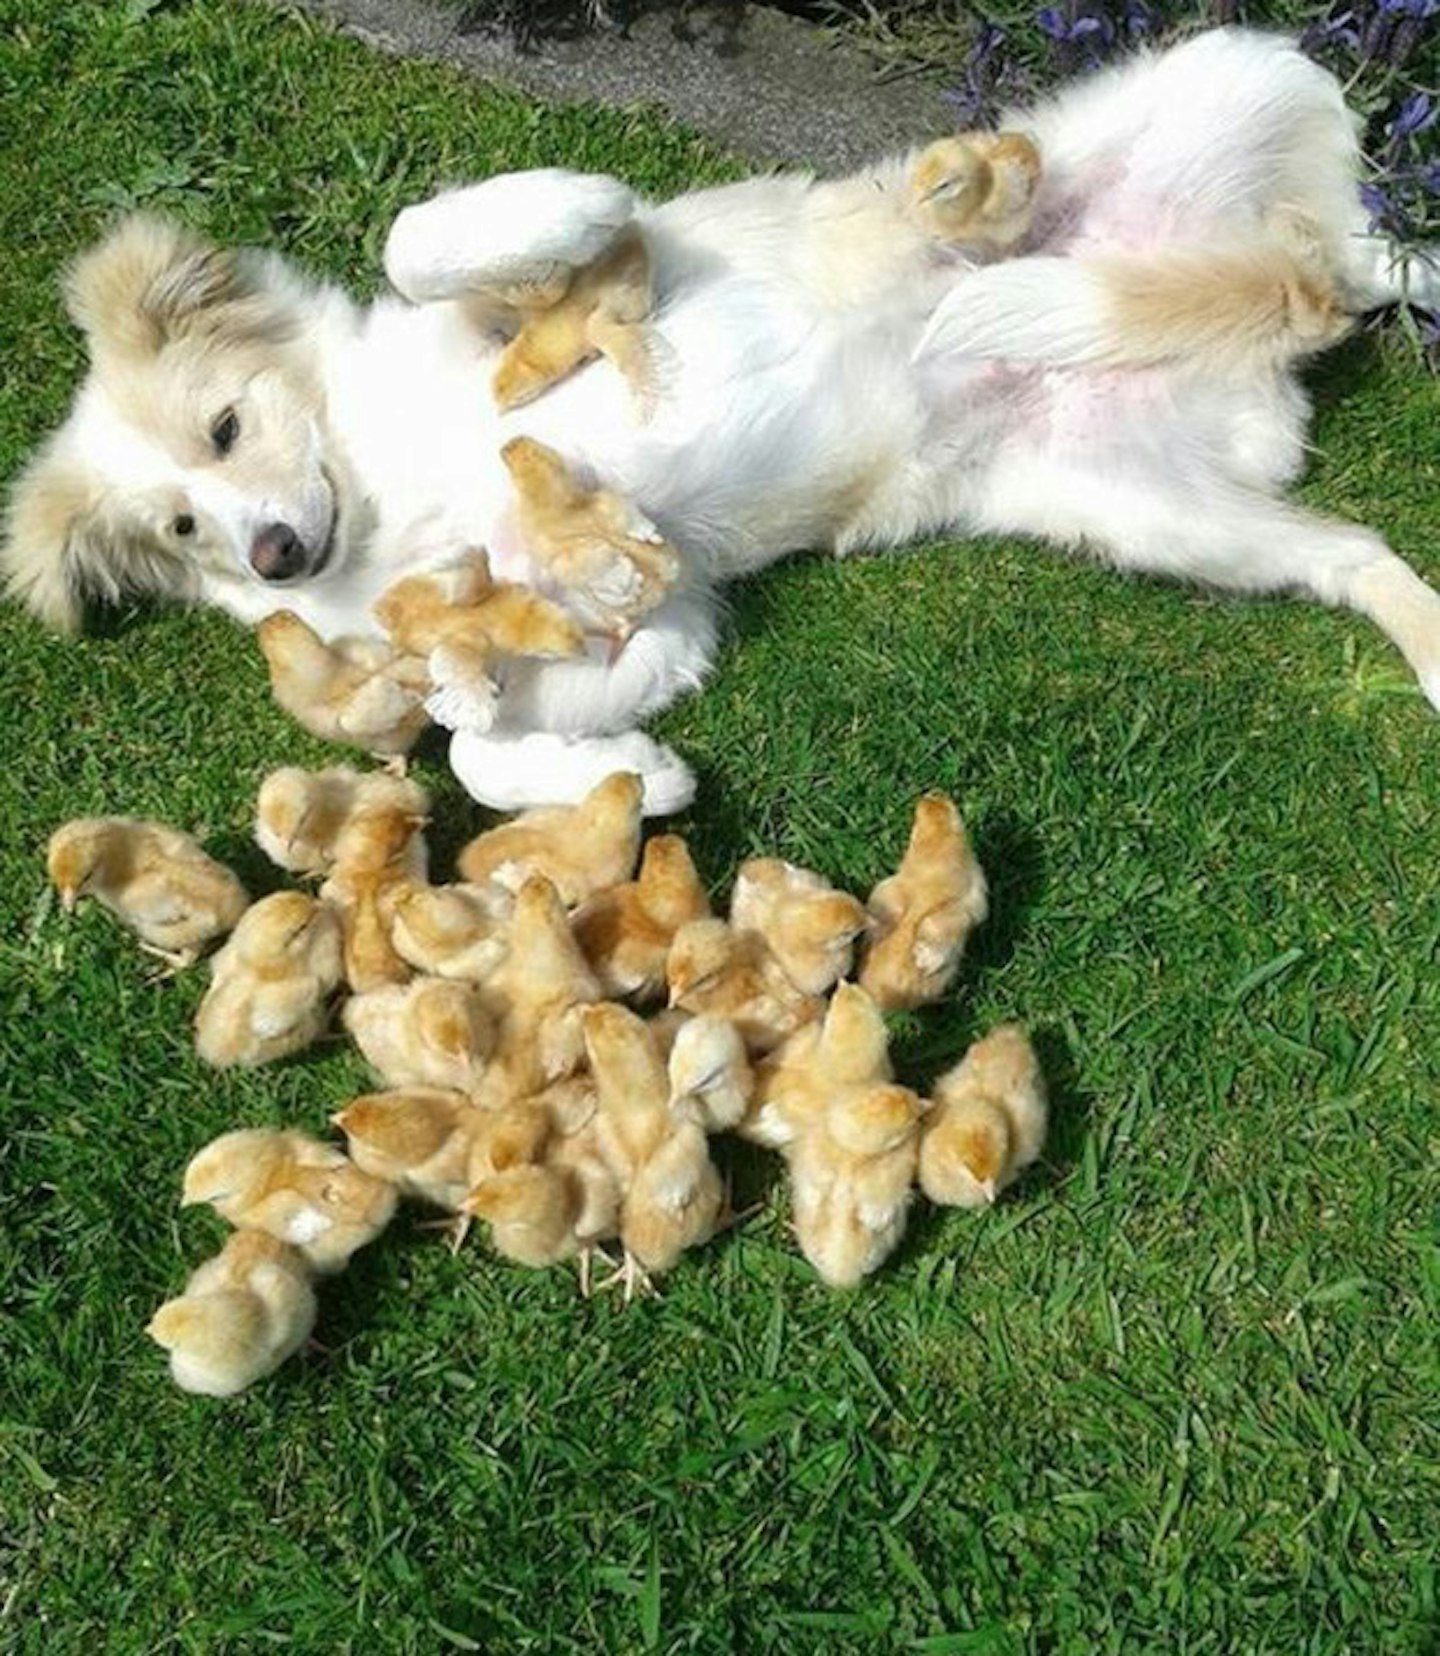 Little ducklings and their puppy pal!